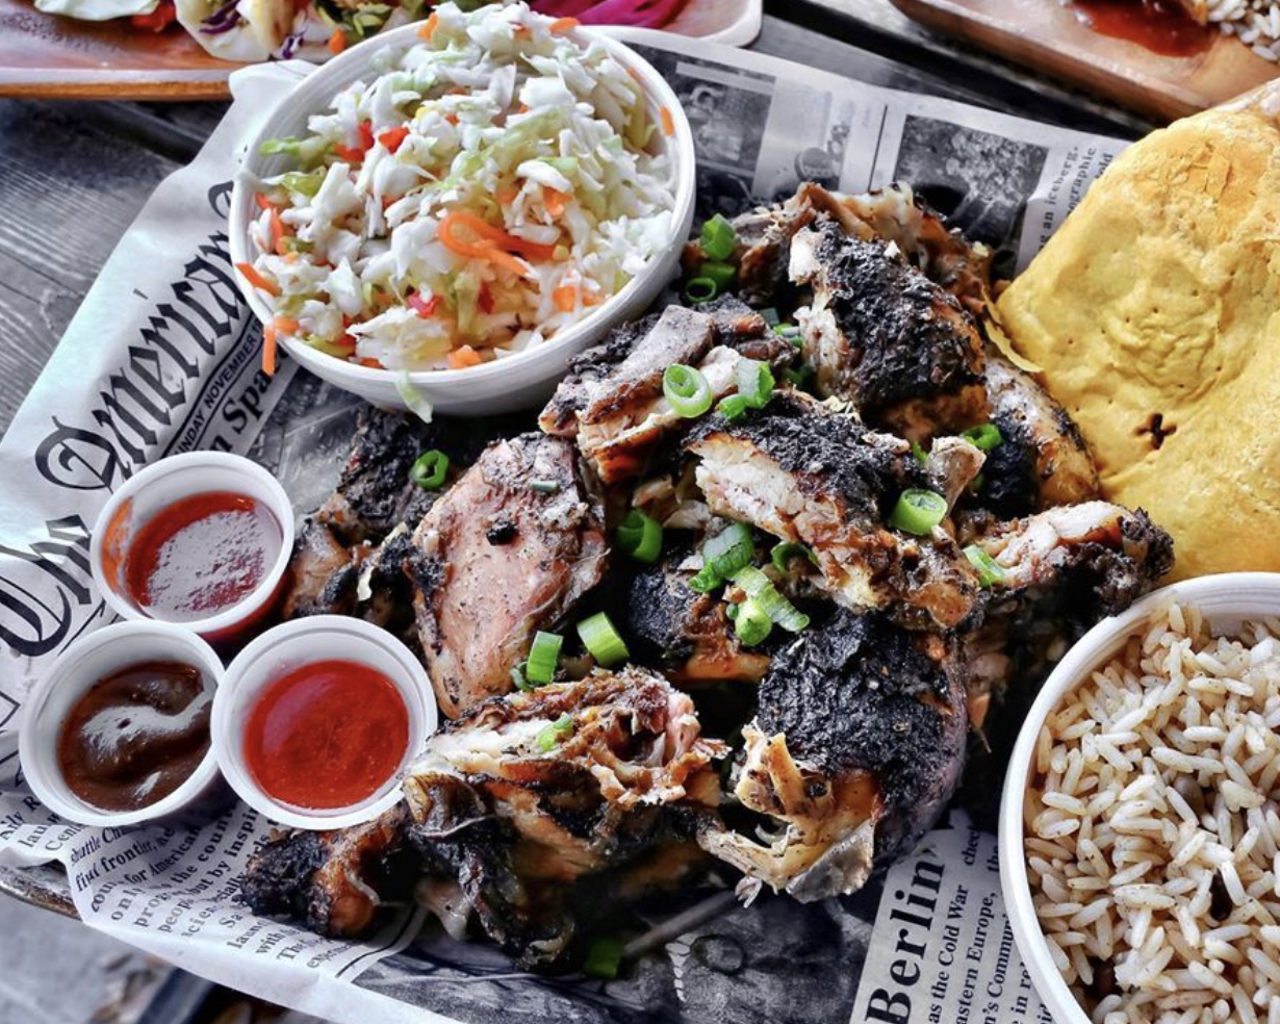 The Jerk Shack
117 Matyear St., 210) 776-7780, facebook.com/thejerkshacksatx
Chef Nicola Blaque’s West side Jamaican hotspot was recently named on GQ’s Best New Restaurant list. The jerk chicken is obviously a big seller, but they also offer jerk ribs, plantains, and mac and cheese. Just keep in mind, you might want to get there early, because they usually sell out! 
Photo via Instagram  
thejerkshacksatx